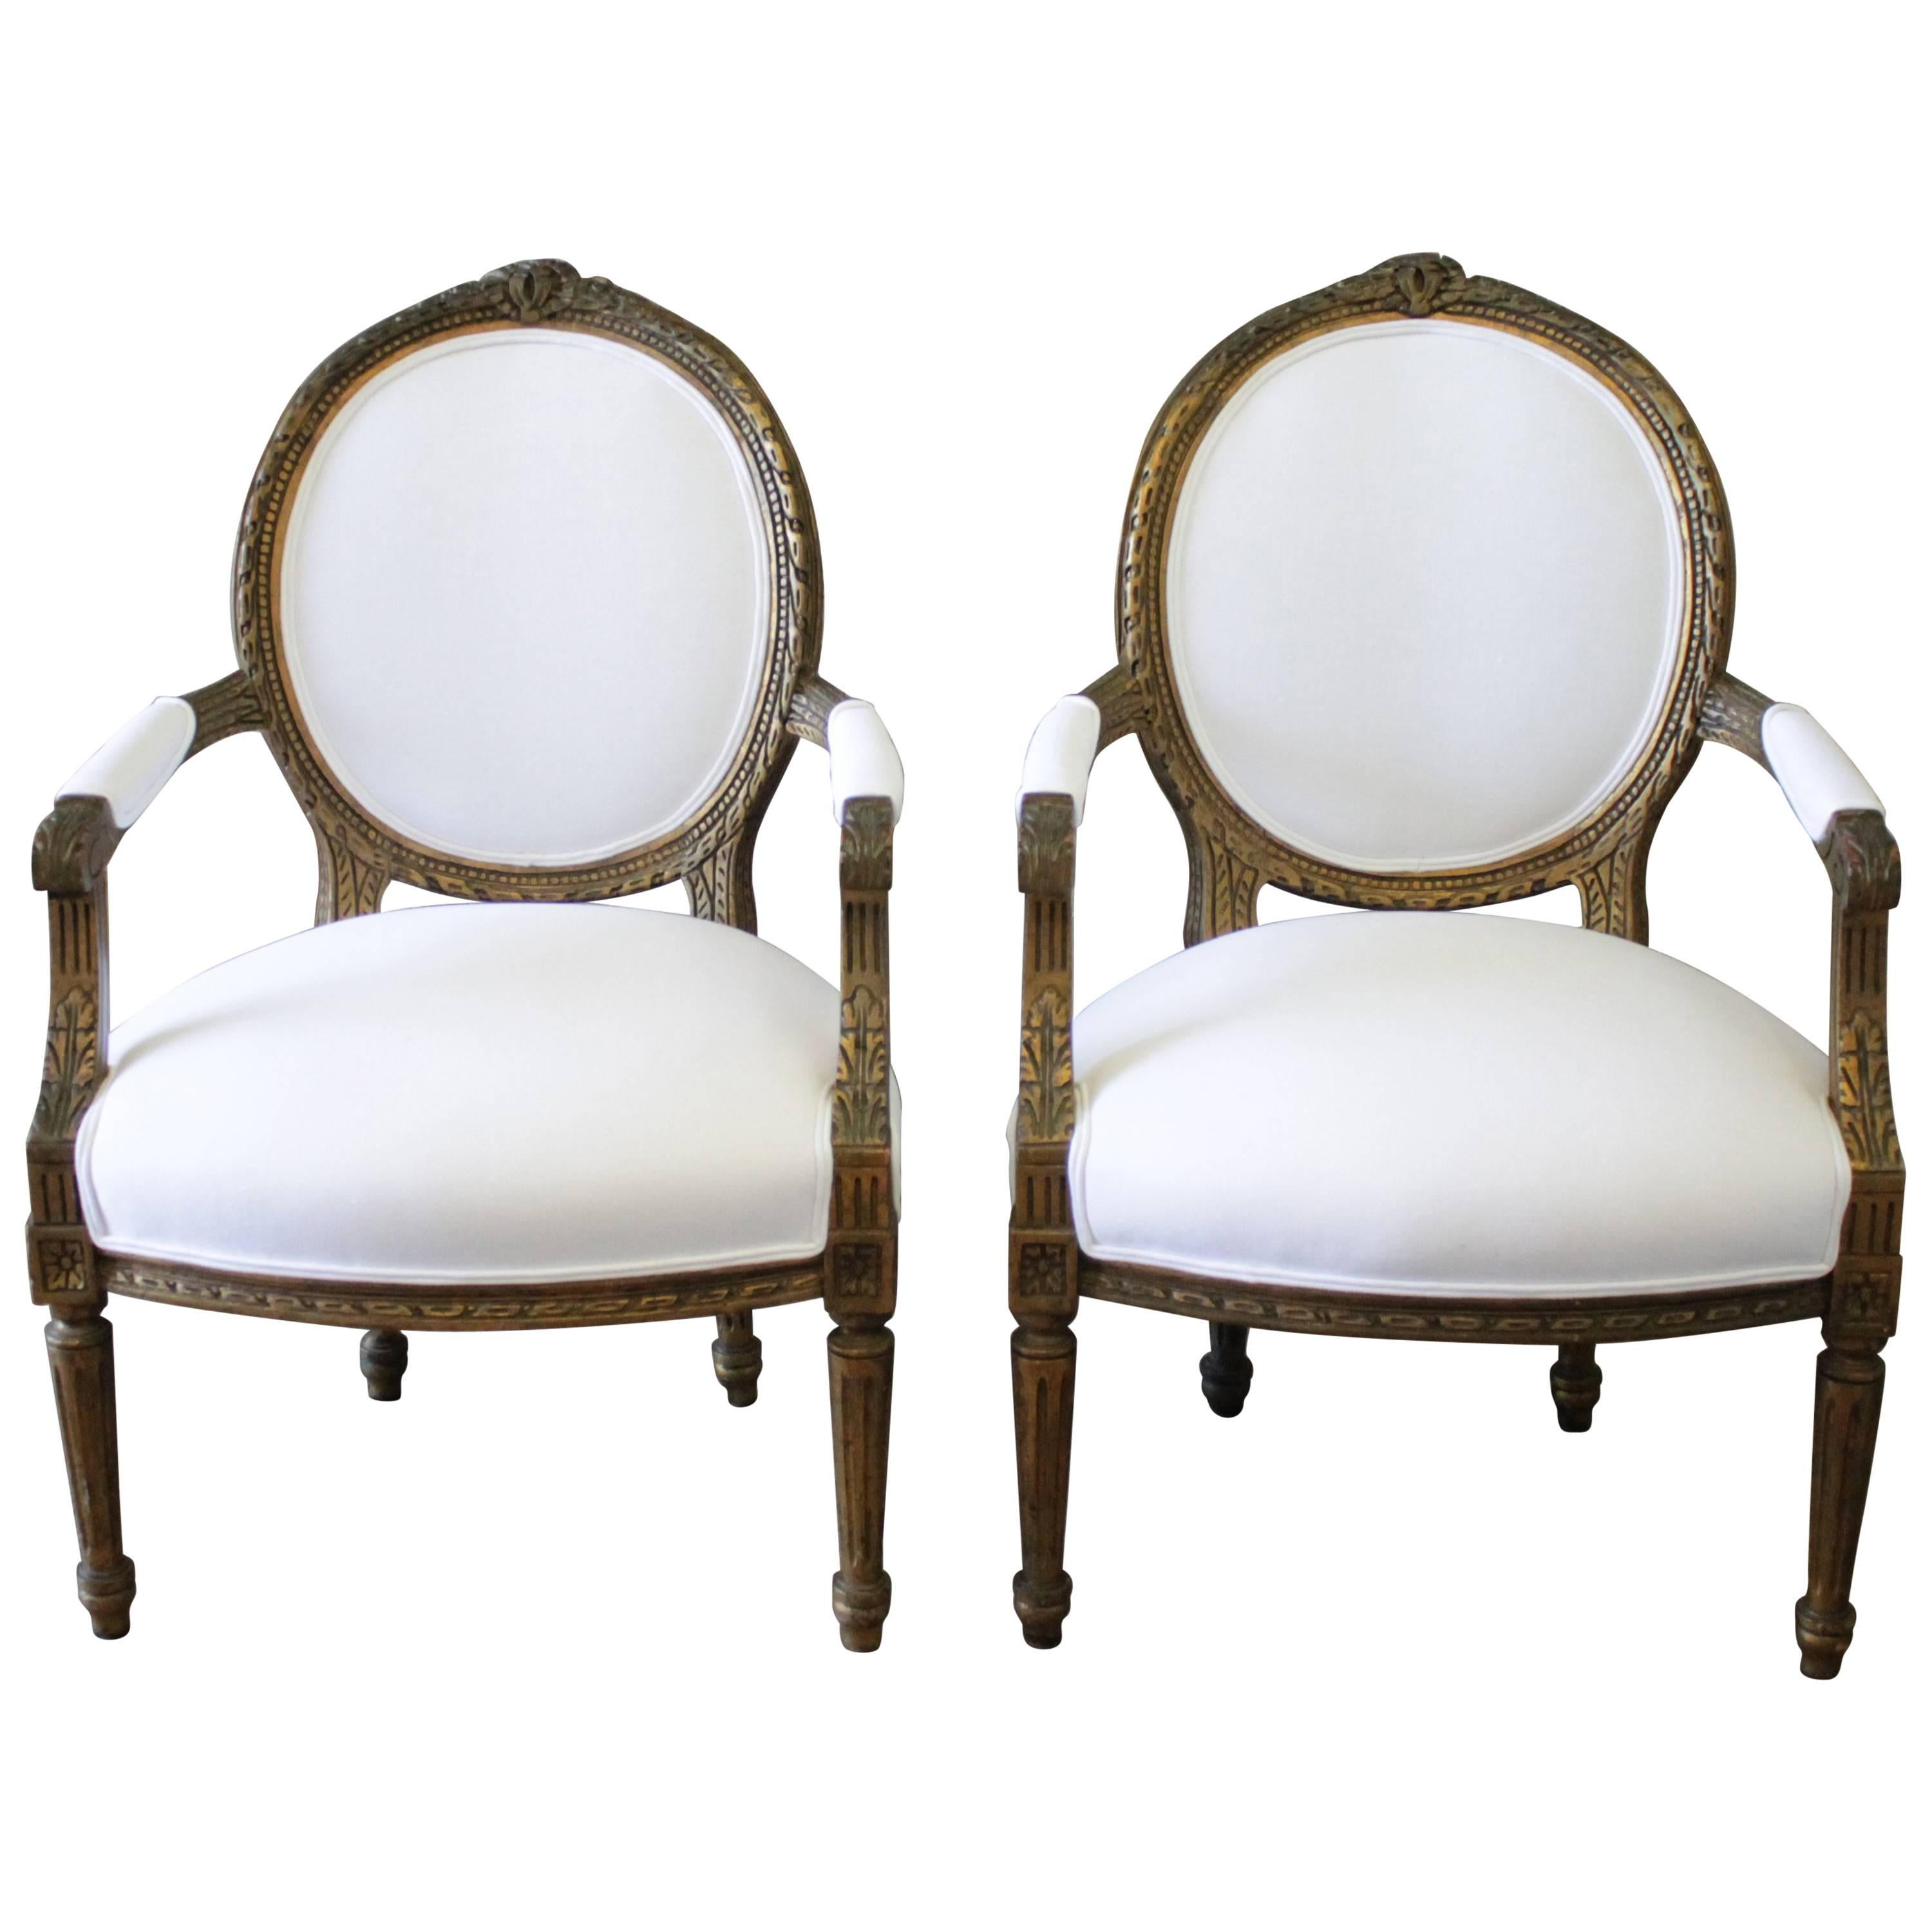 Pair of 19th Century Giltwood Ribbon Carved Louis XVI Style French Chairs